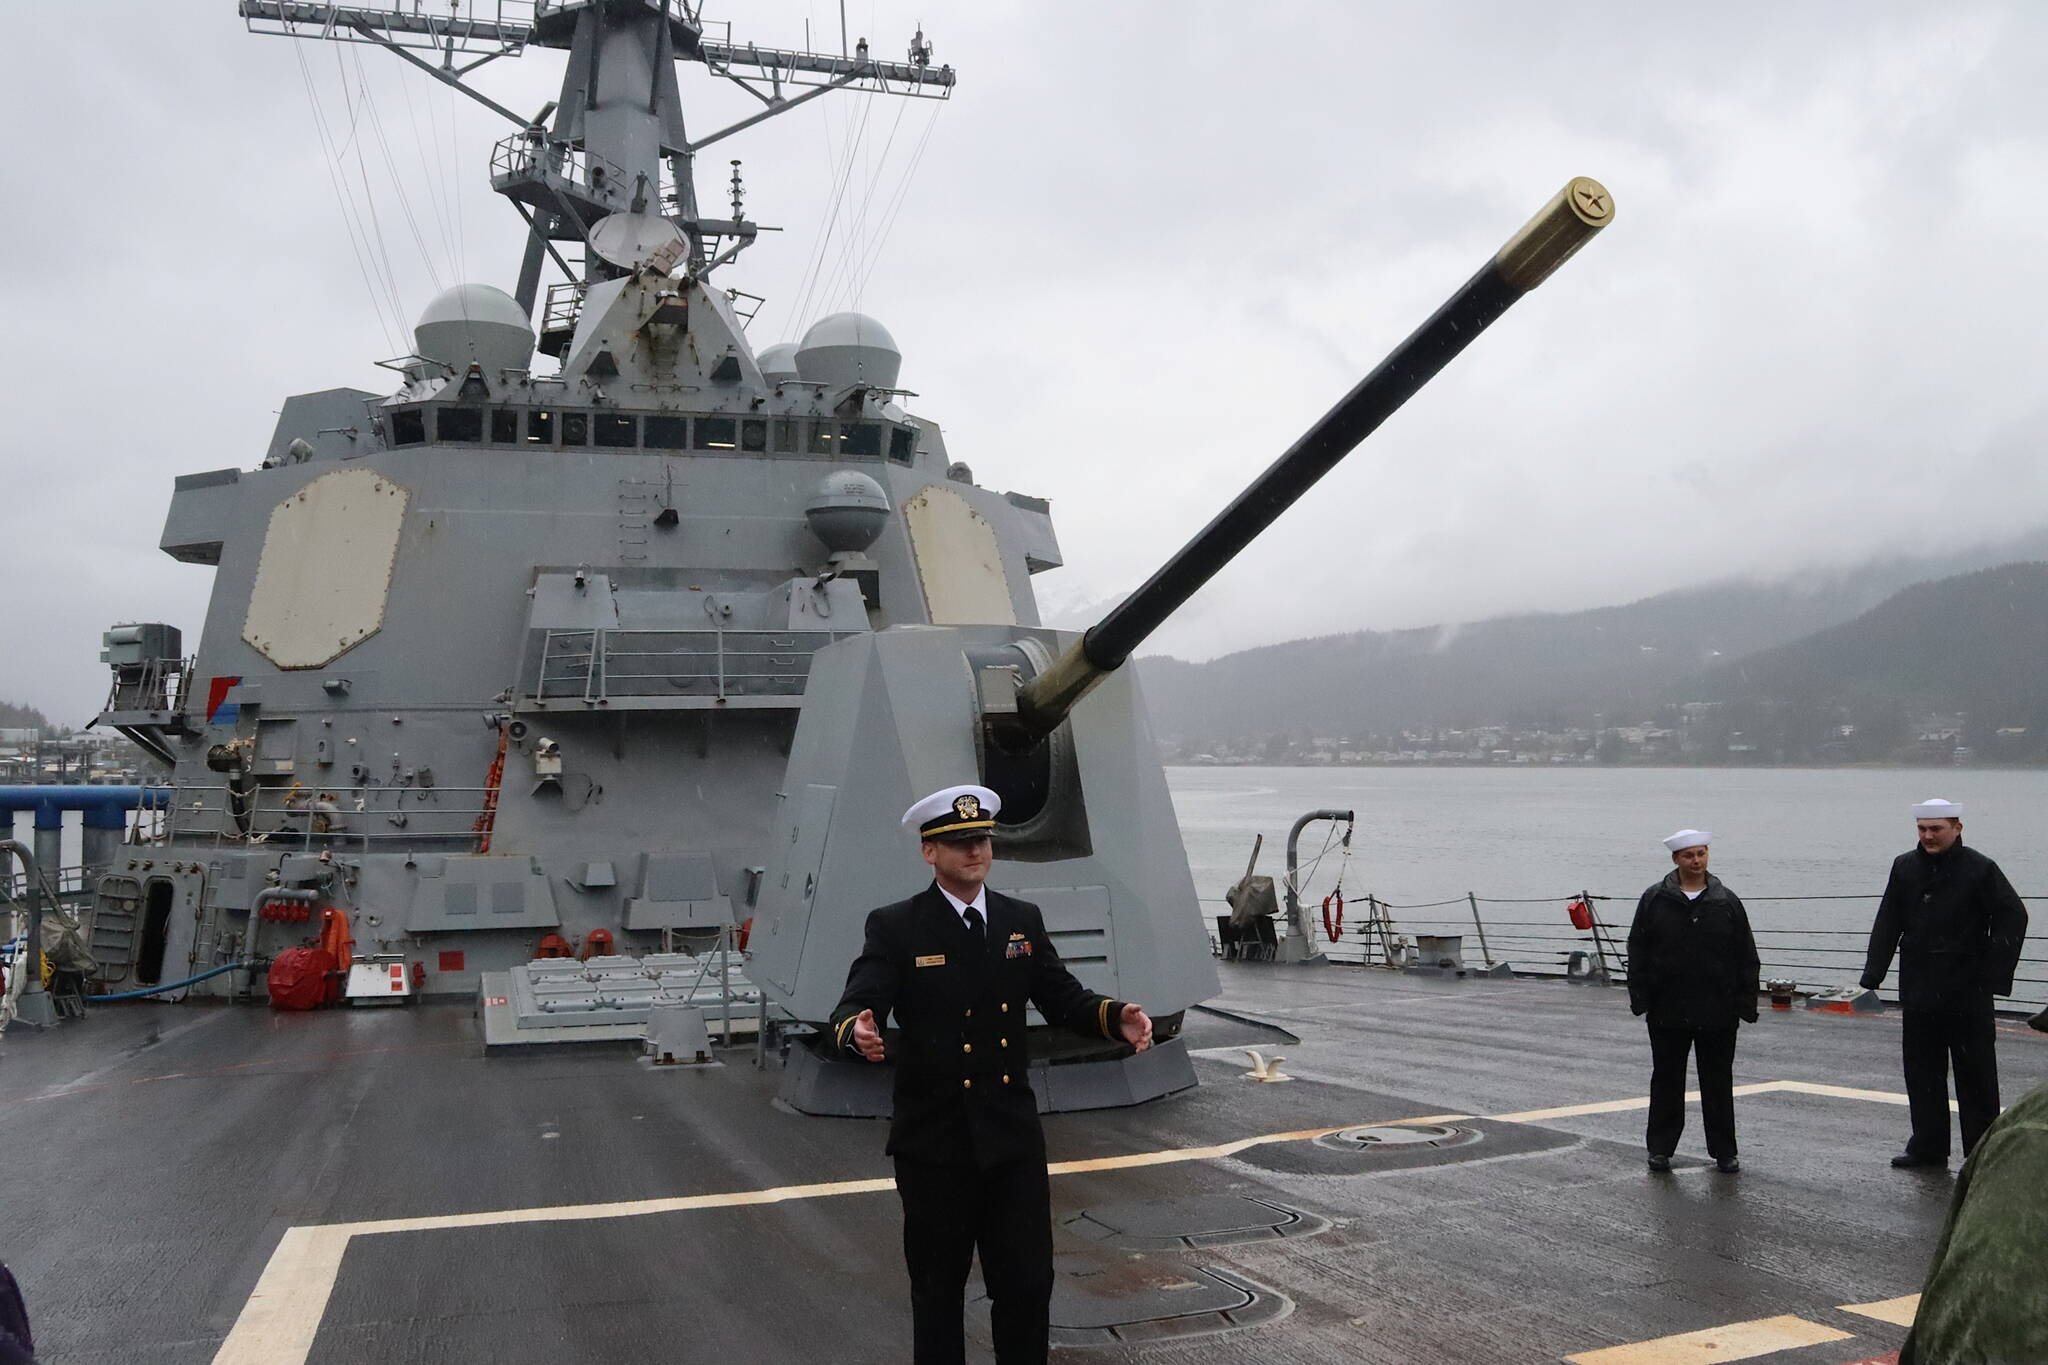 Lt. Daniel Schuerman, the ship’s operations officer, shows the 5-inch/54-caliber Mark 45 gun on the foredeck of the USS William P. Lawrence during a tour Sunday in Juneau. (Mark Sabbatini / Juneau Empire)